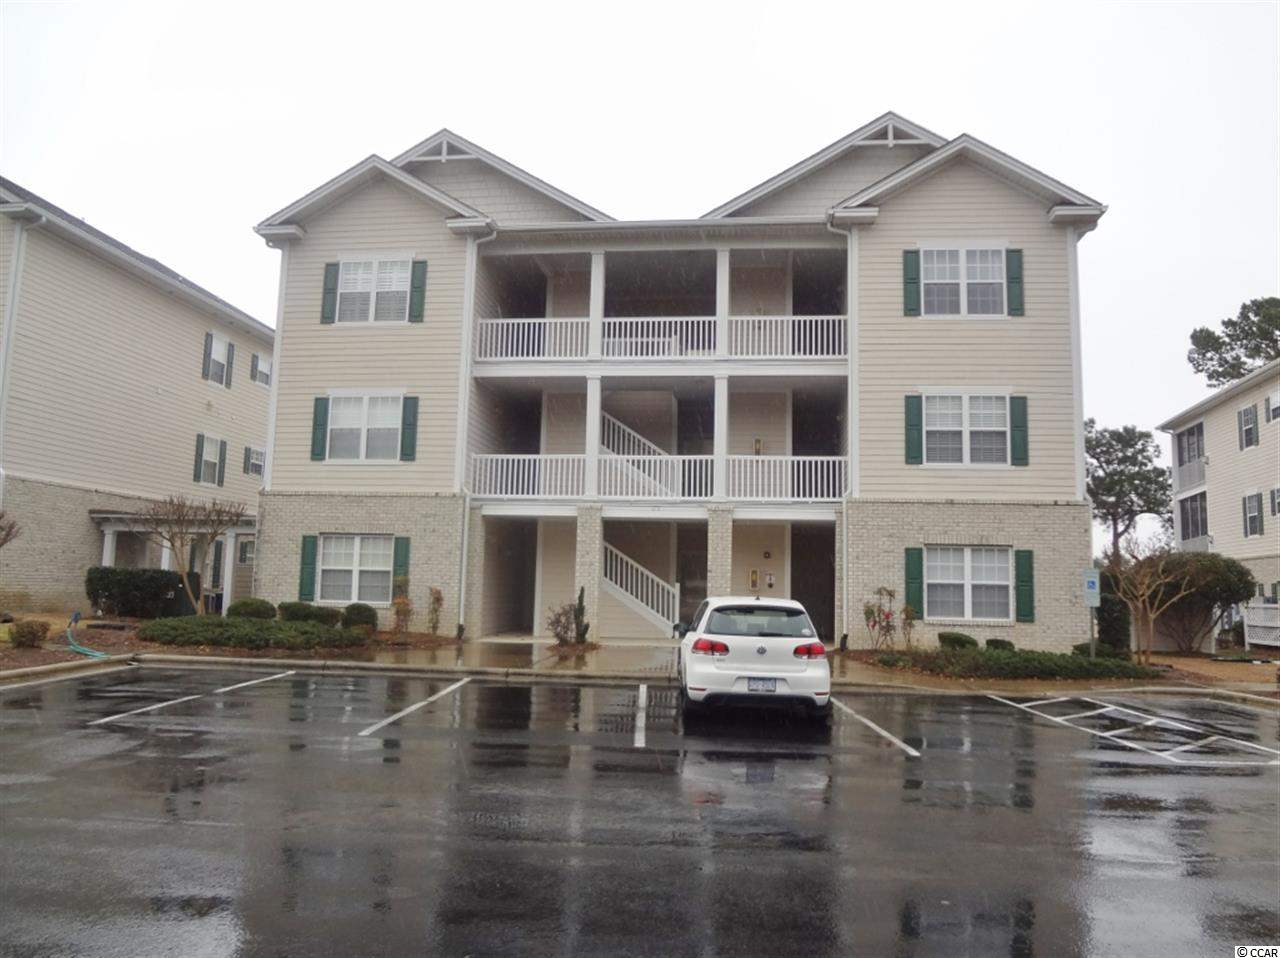 176 Clubhouse Rd. UNIT #6 Sunset Beach, NC 28468